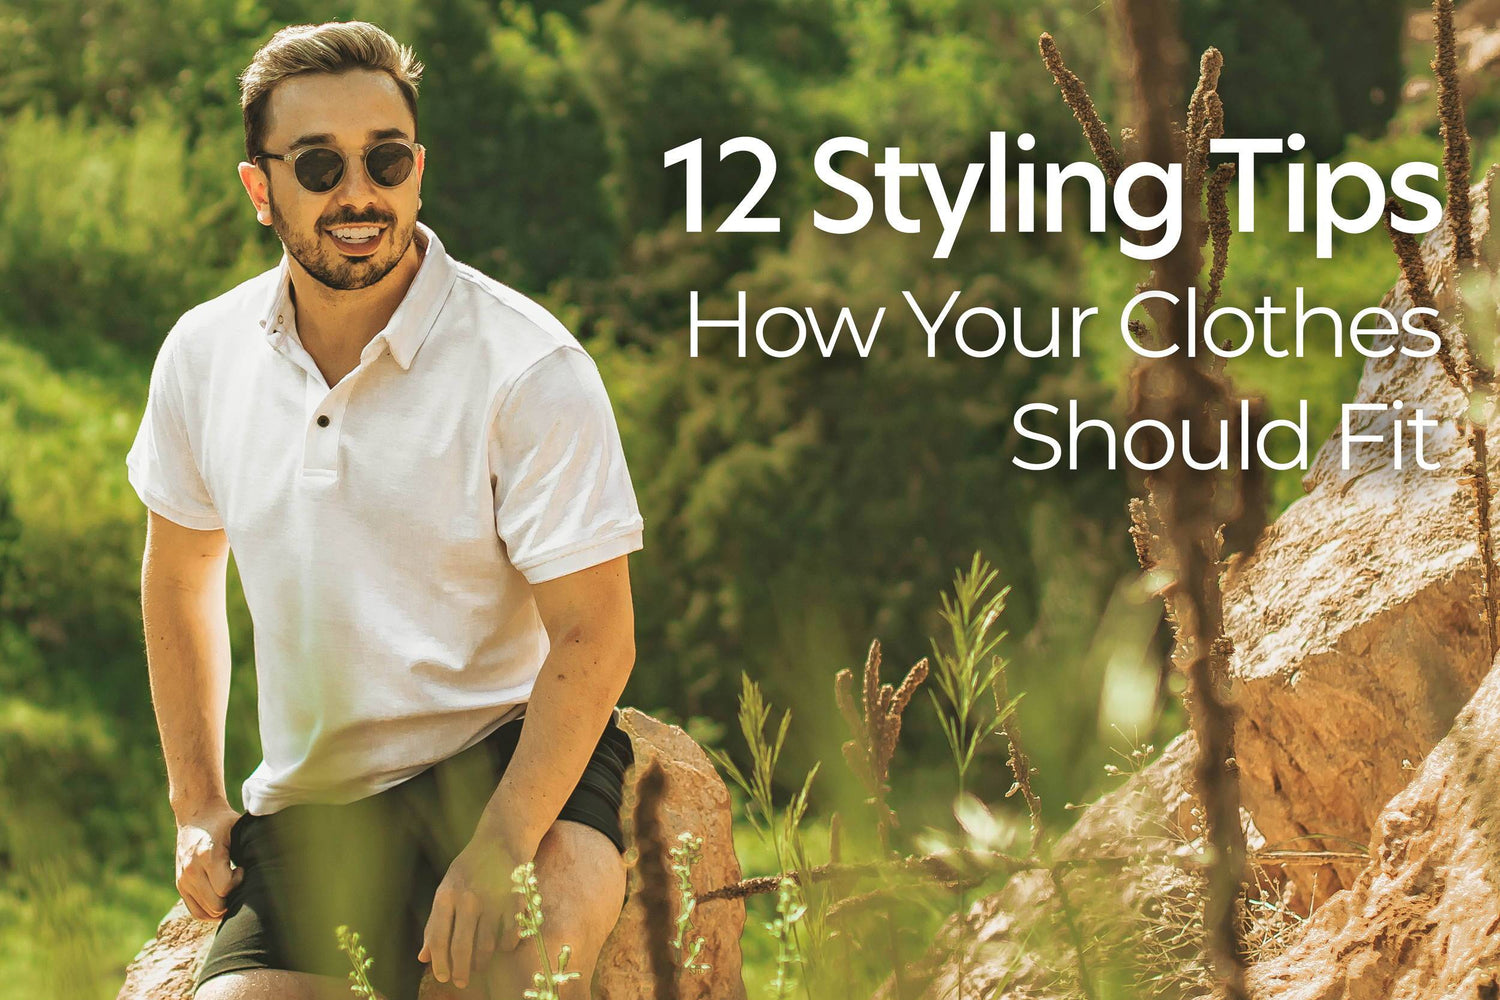 12 Style Tips for Short Guys - How Your Clothes Should Fit